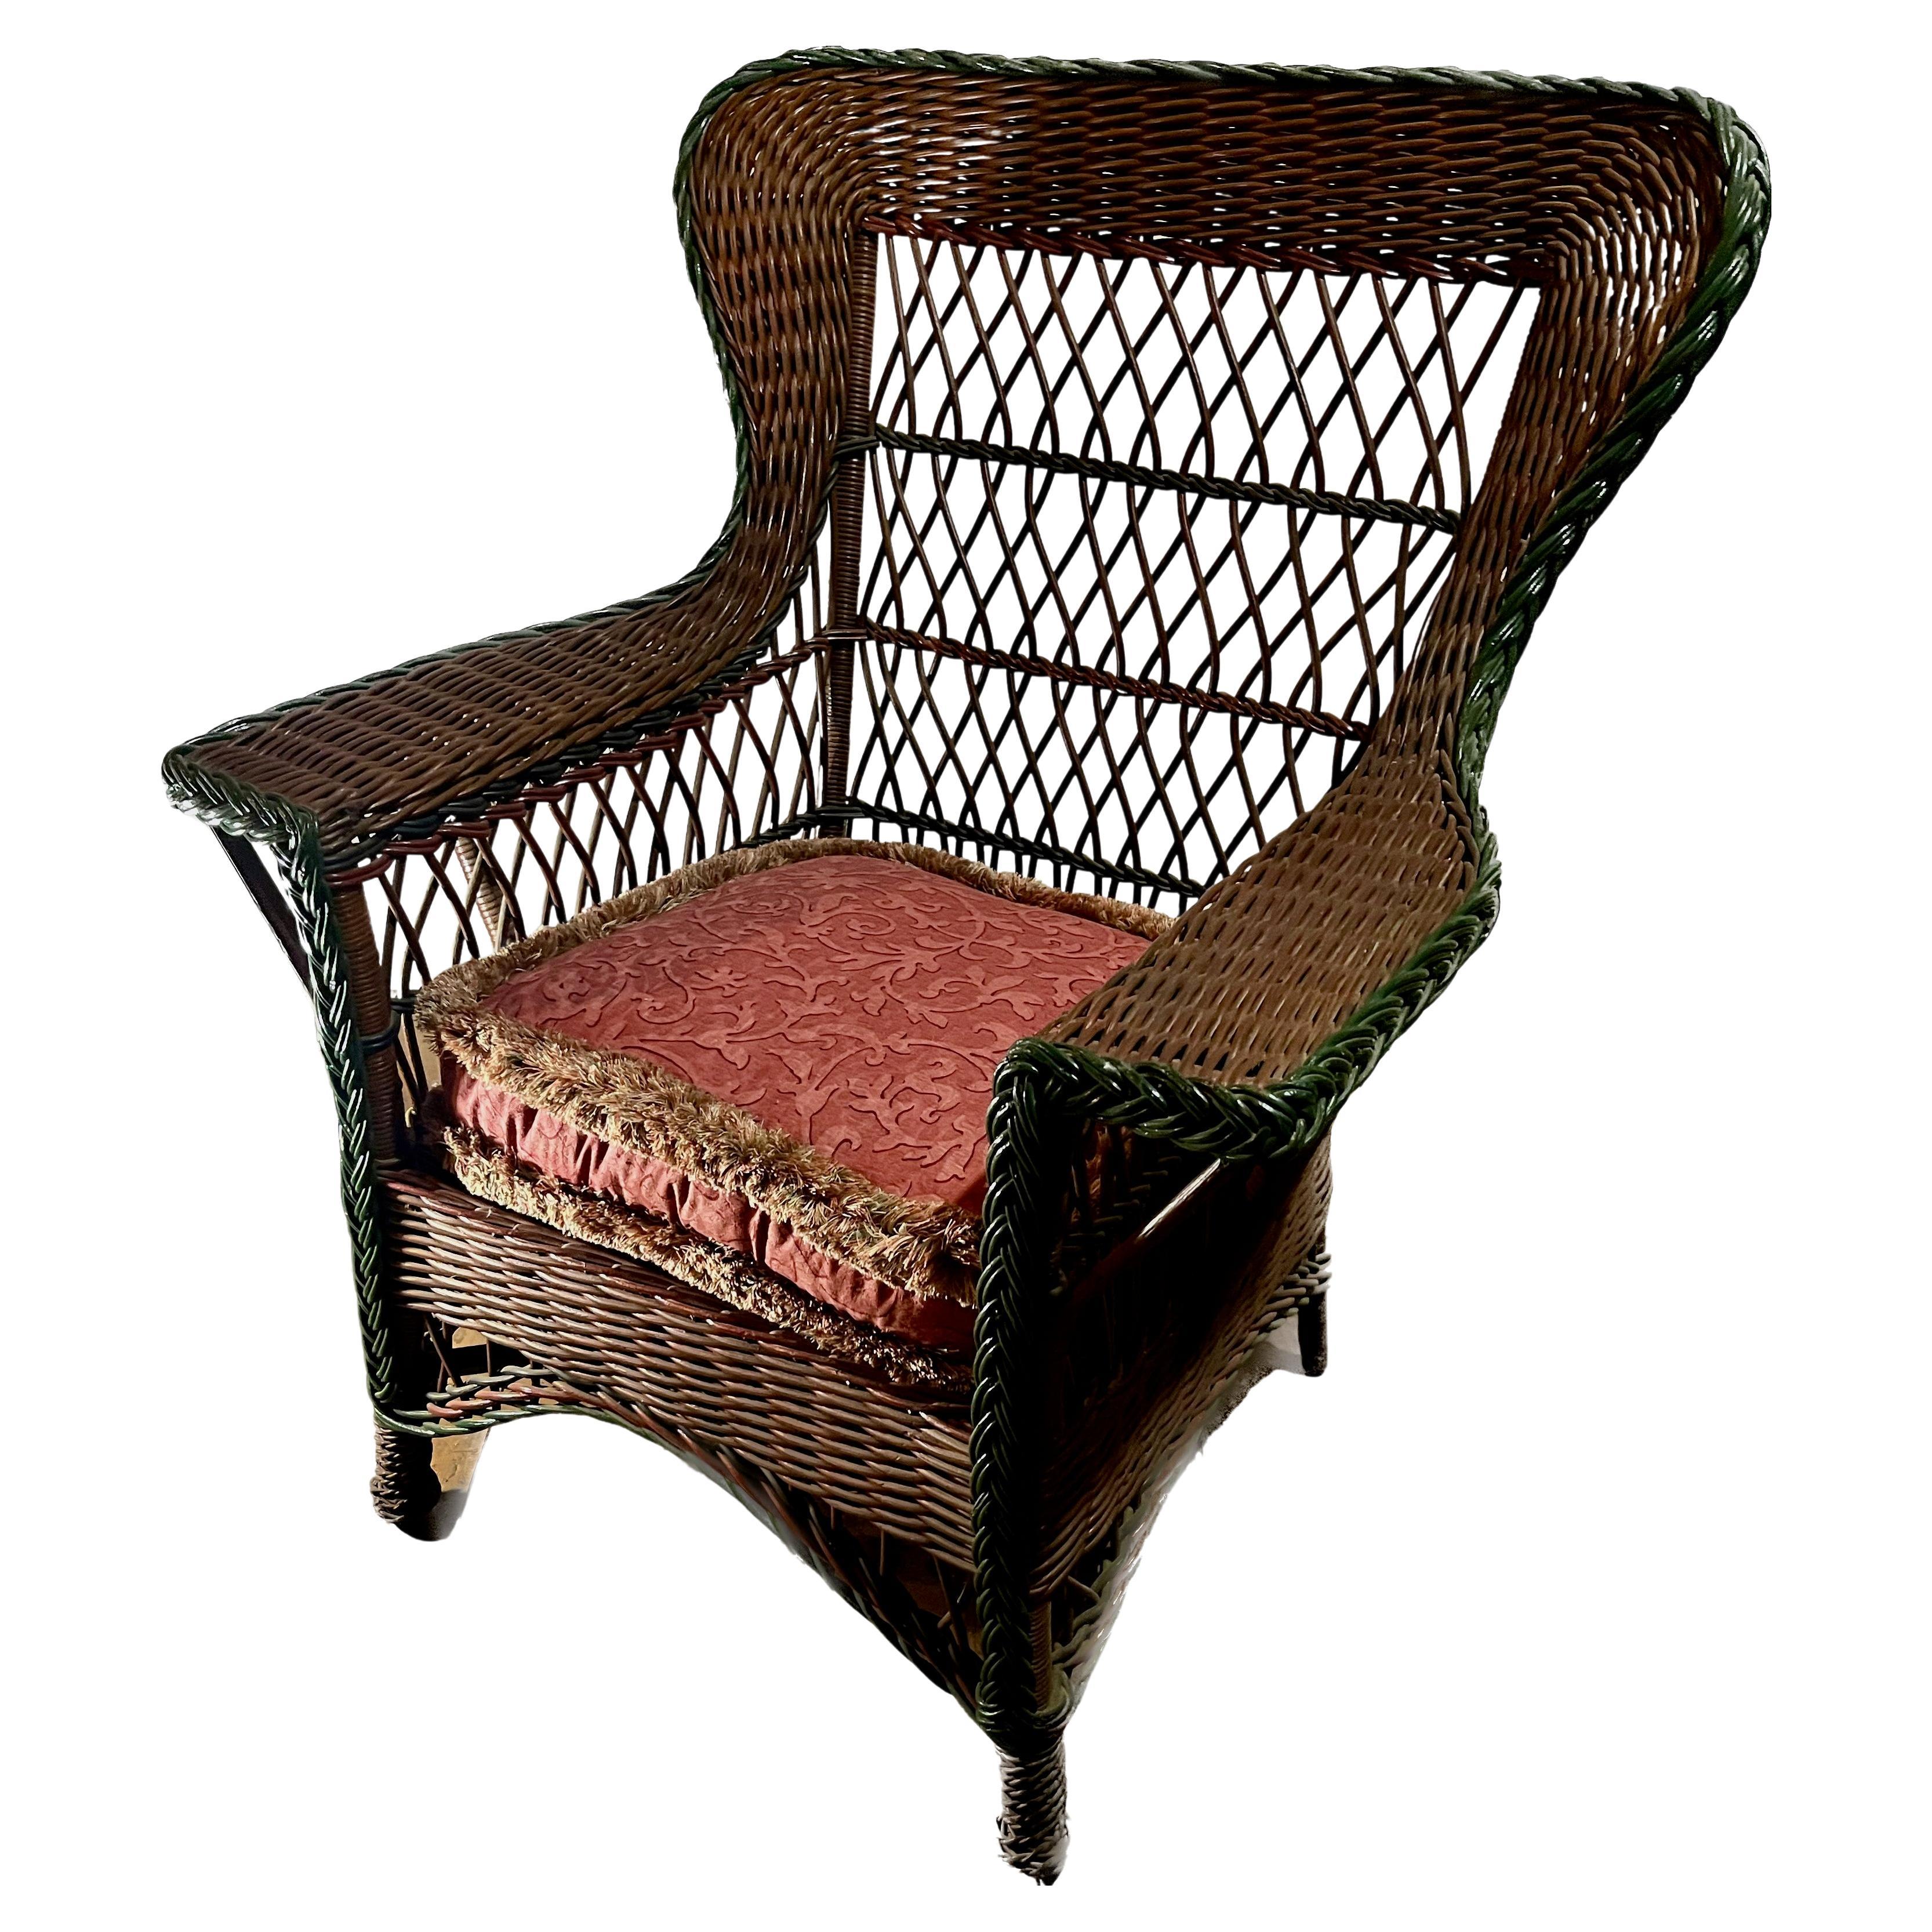 Antique Bar Harbor Style Wicker Wing Chair in Natural Finish with Green Trim For Sale